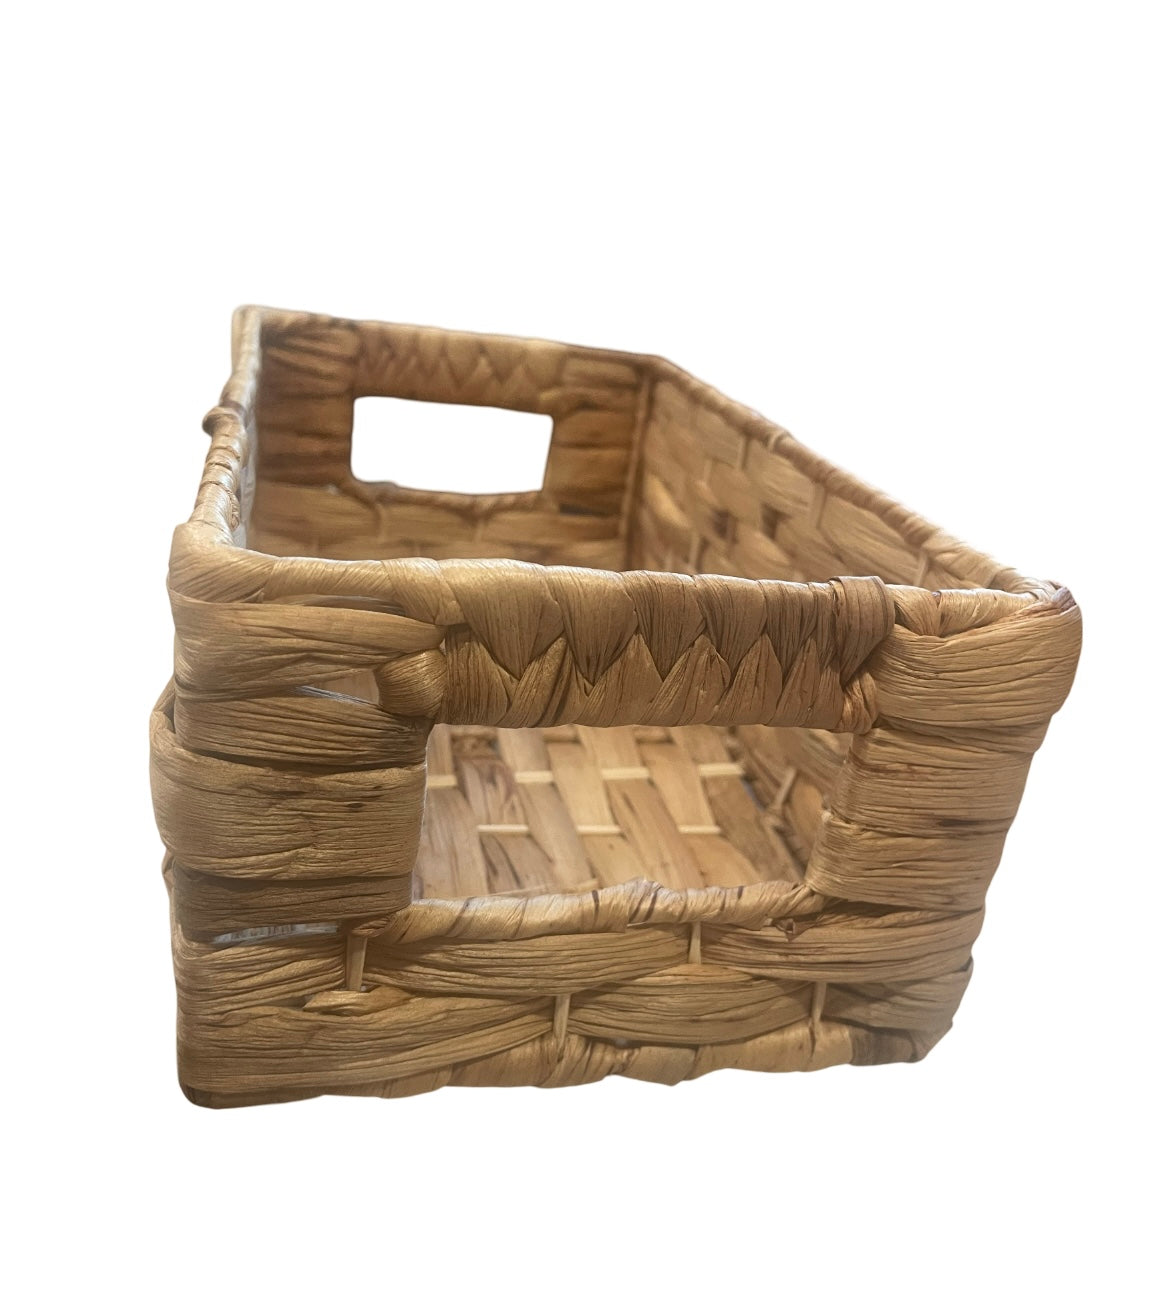 Weaved Basket 10” x 6” x 4” with cut out carry handles